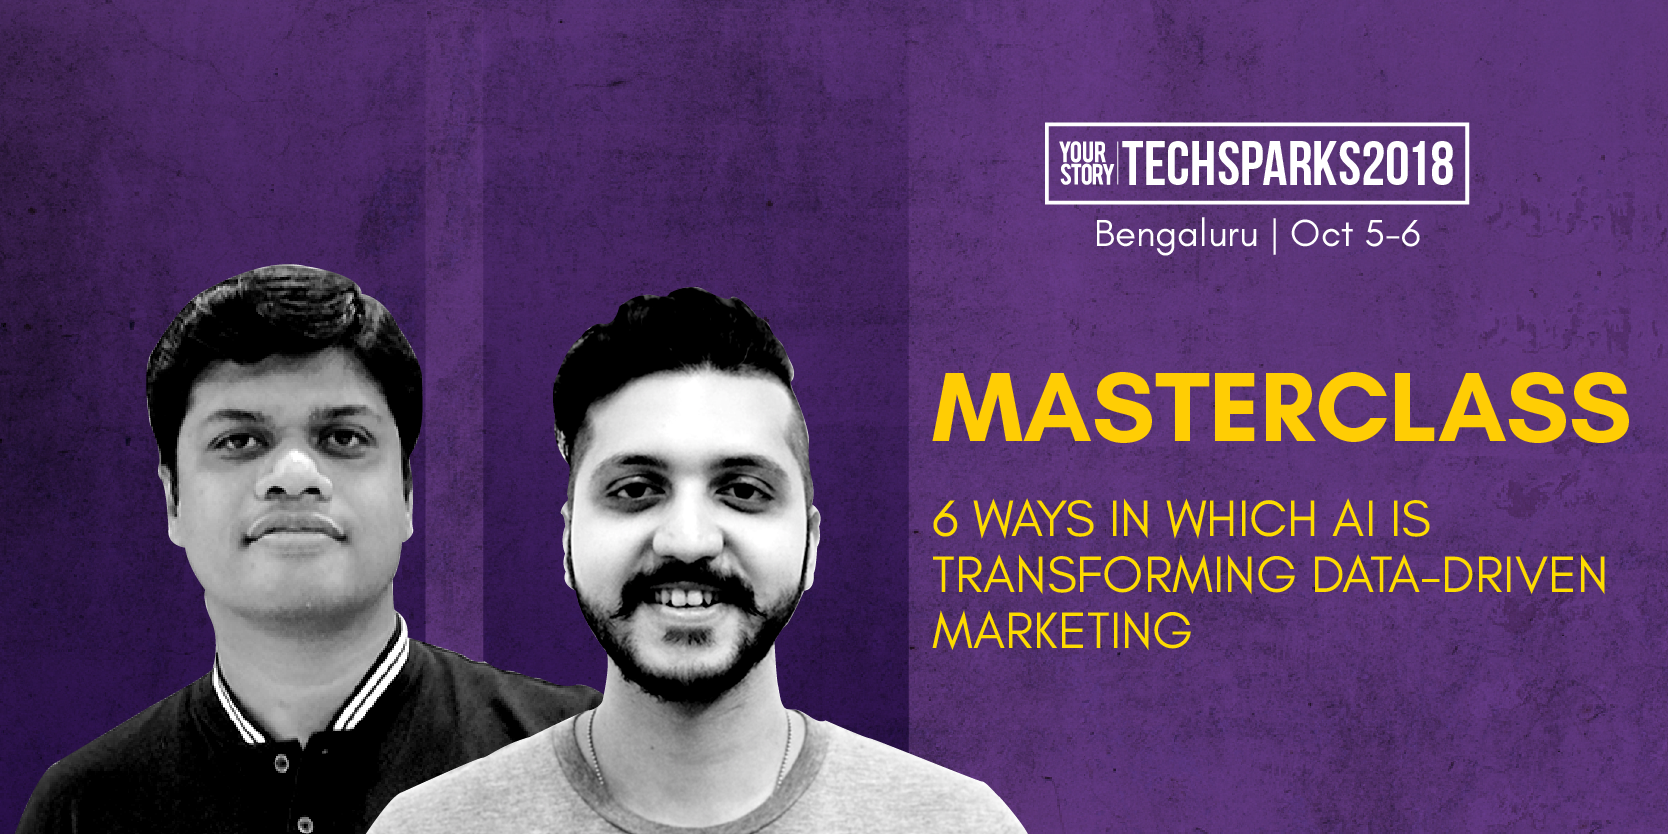 AI can help deliver better CX at scale. Learn from experts at this workshop on data-driven marketing at TechSparks